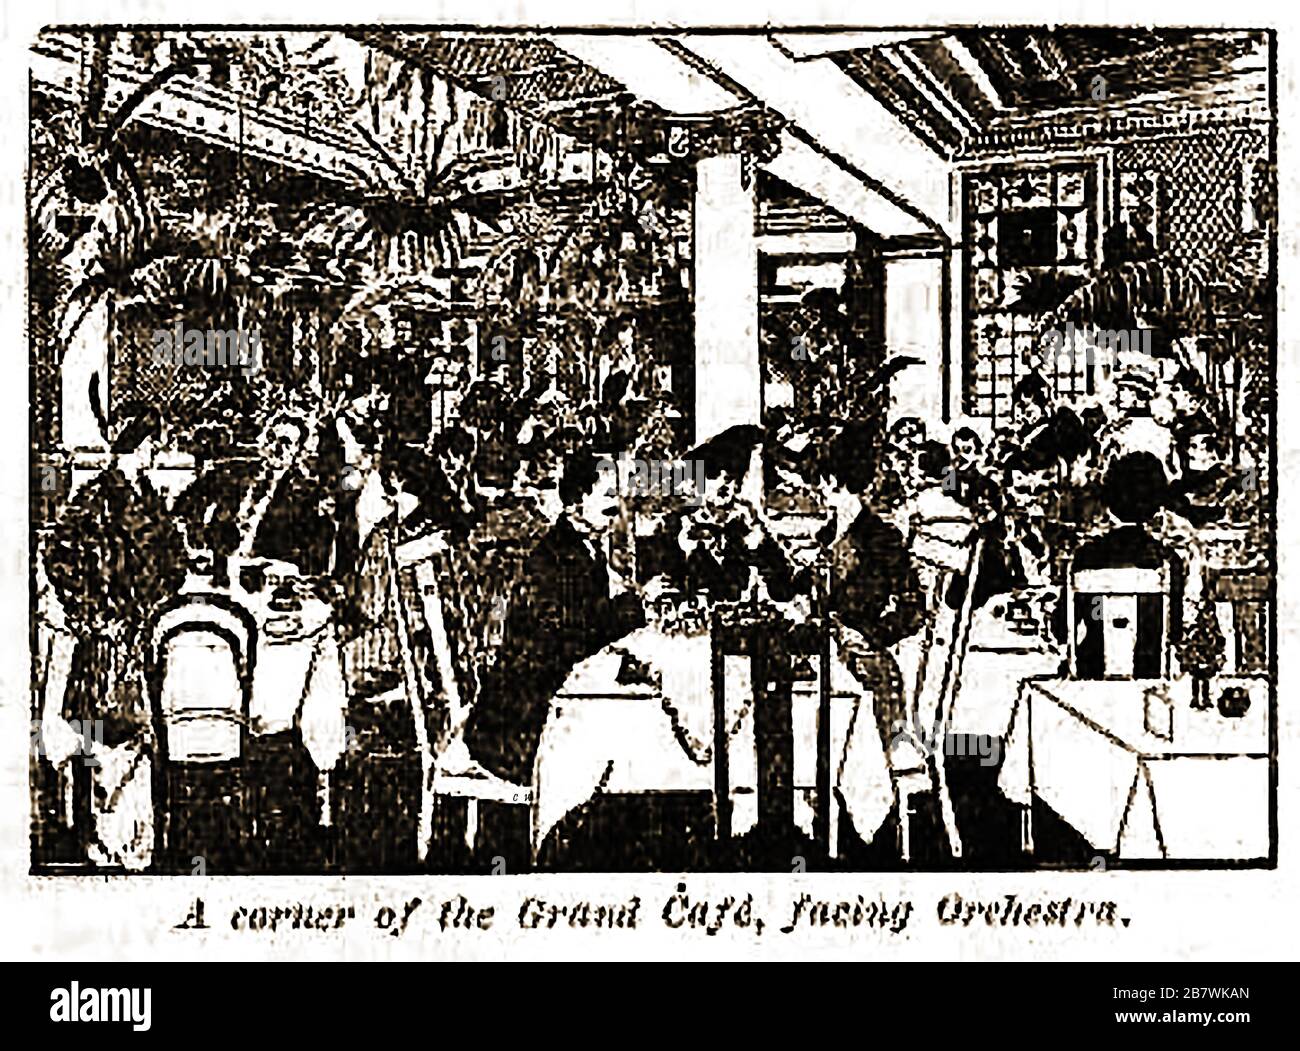 Part of a 1916 advertisement for Polwolny's restaurant and Grand Cafe Hull. Ernst Adolf Powolny left Saxony for Leeds in 1859 aged 17 to seek his fortune. He founded a renowned  restaurant  The Hull branch opened in 1903 with high class features such as a piano room,  ' a handsome grill, dining and smoke rooms, and ladies’ dining, withdrawing, reading and retiring rooms, luxuriously furnished.' The food was also of extremely high quality. It was  managed by Charles Colomb from Neuchâtel, Switzerland and drew an exclusive clientele. Stock Photo